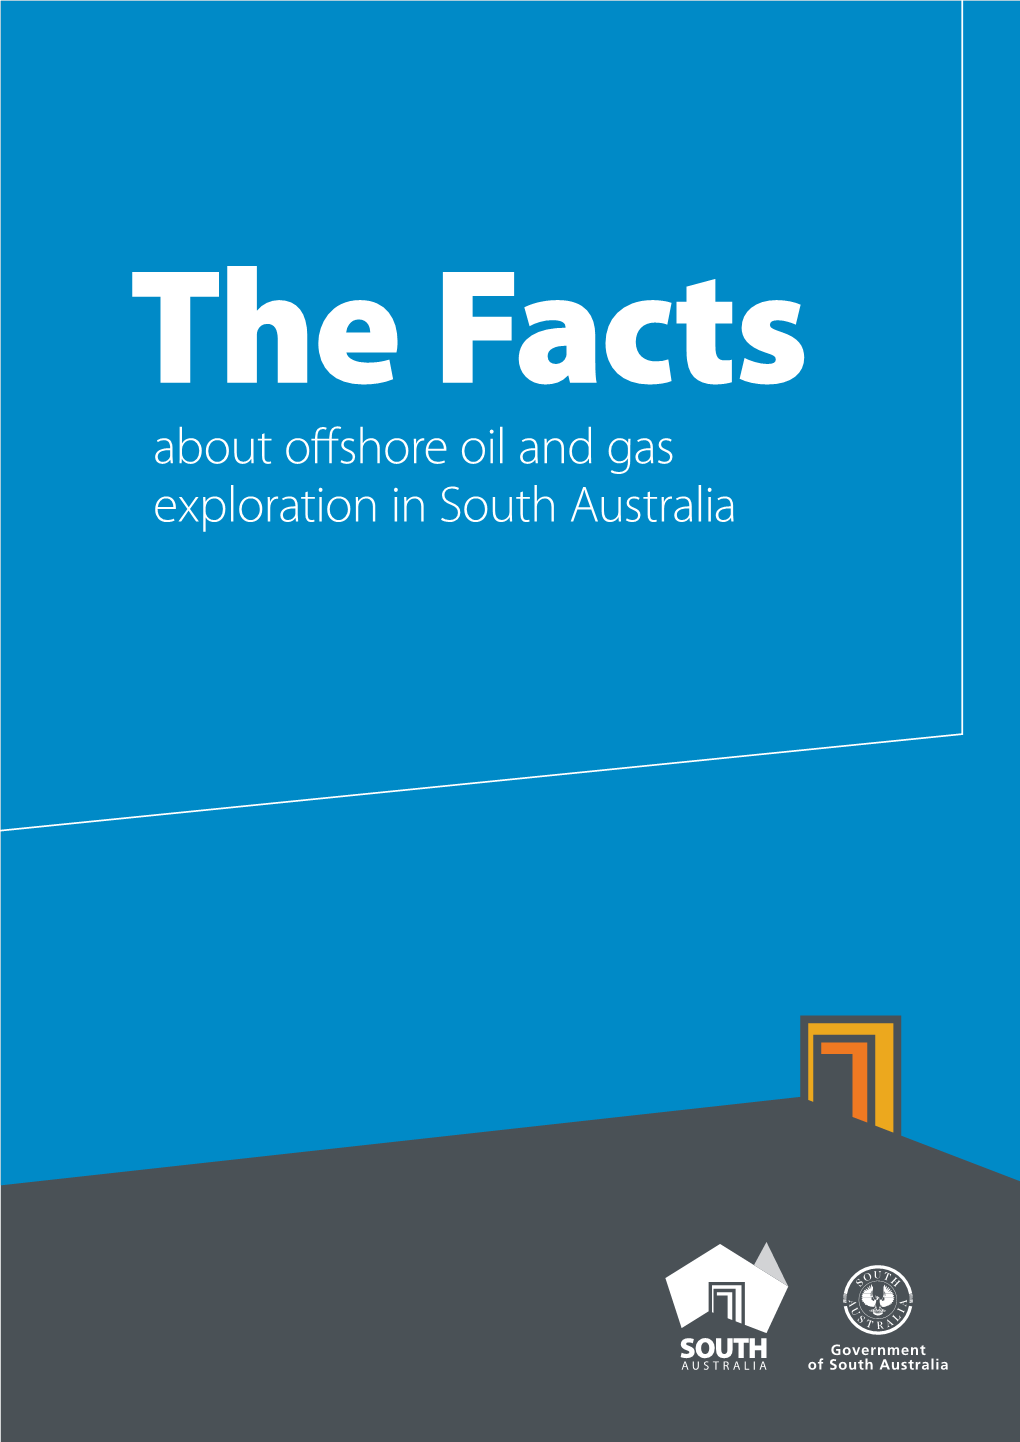 Facts About Offshore Oil and Gas Exploration in South Australia